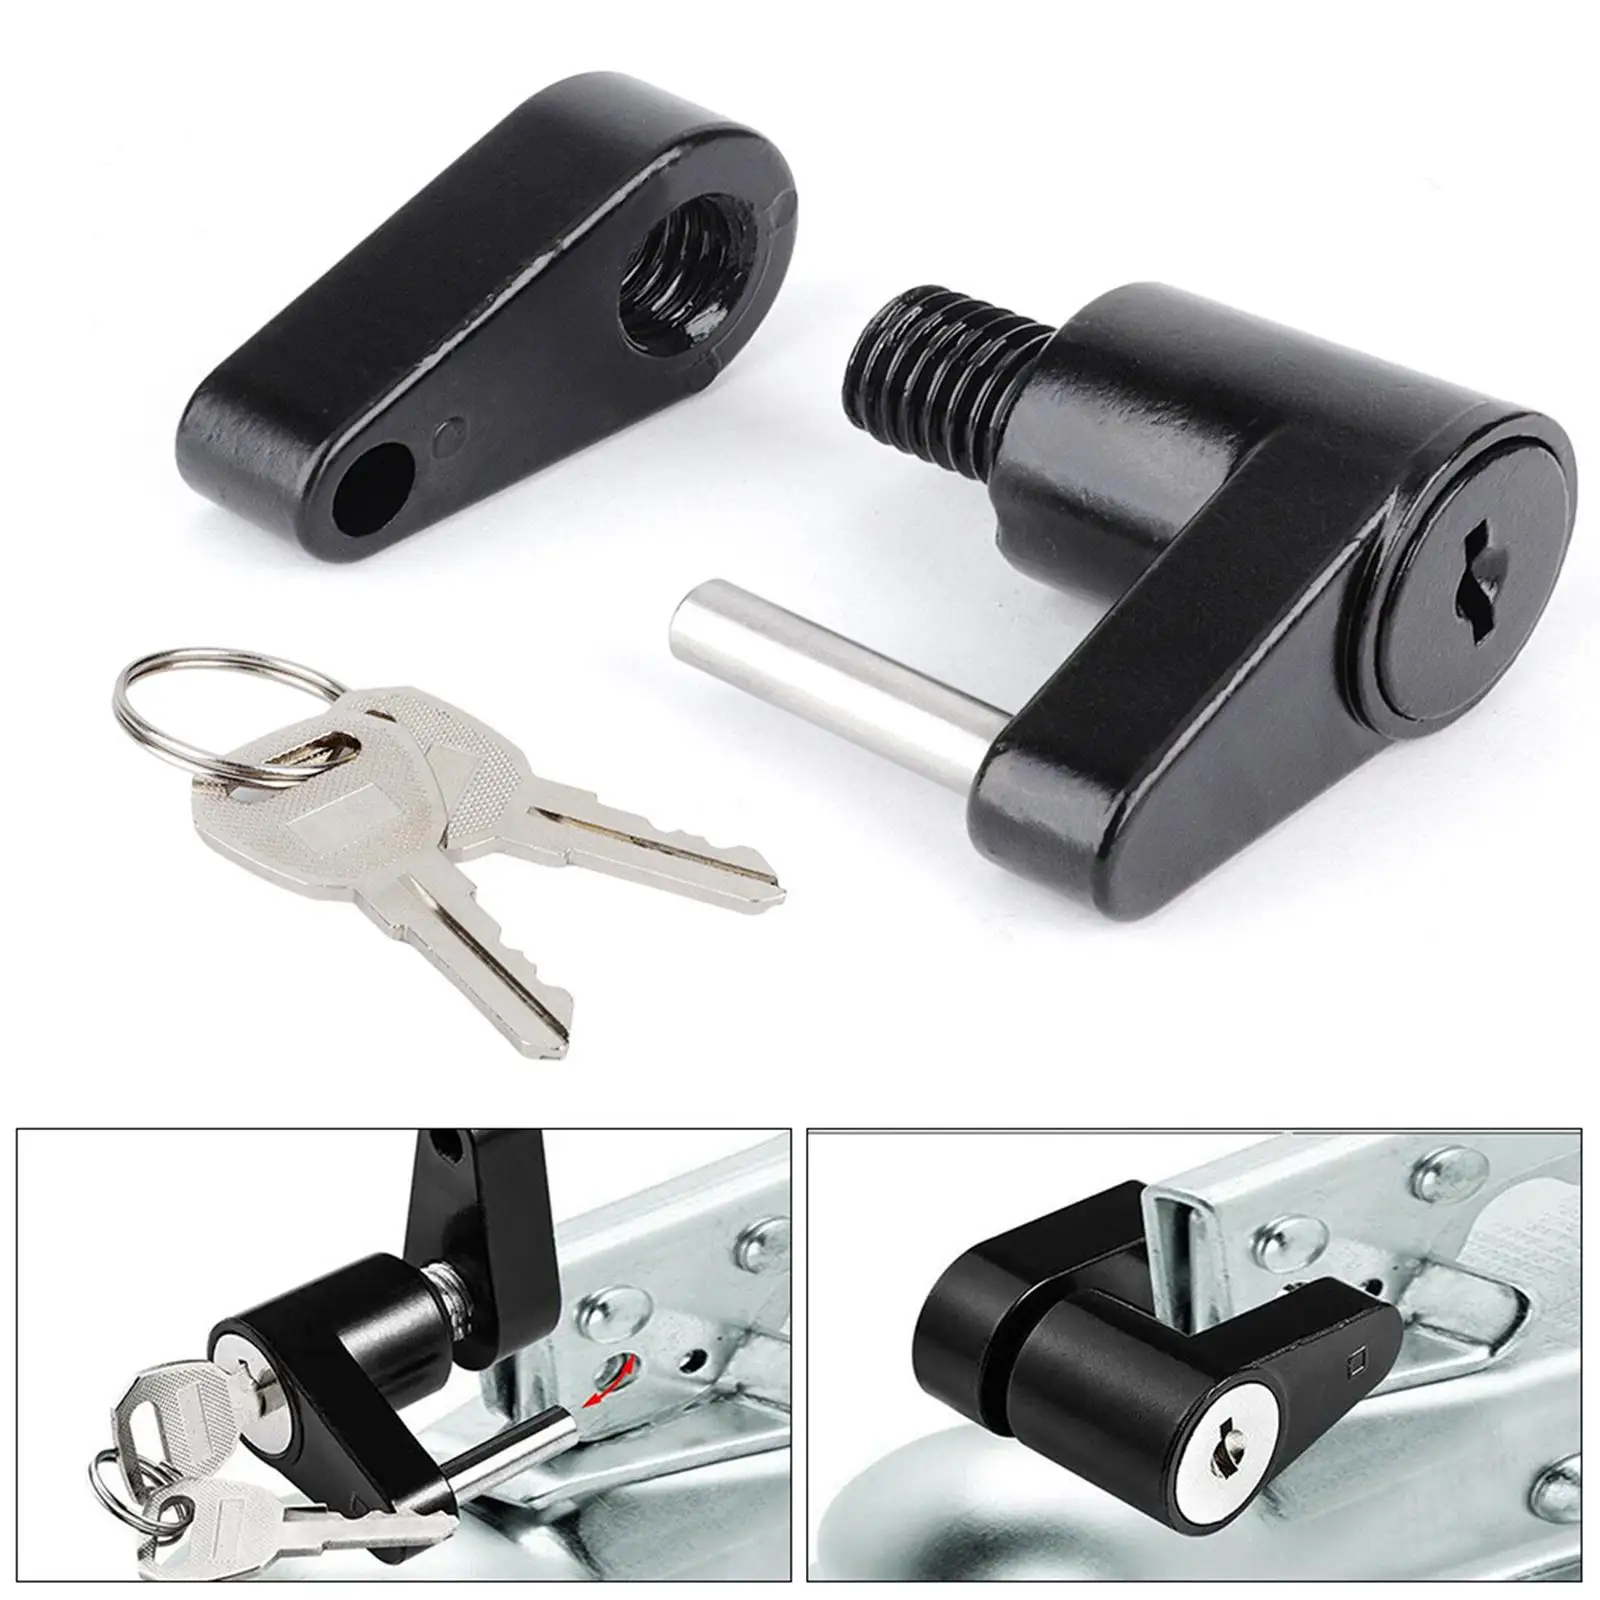 Trailer Coupler Lock with 2 Keys for Construction Vehicles Tow Boat RV